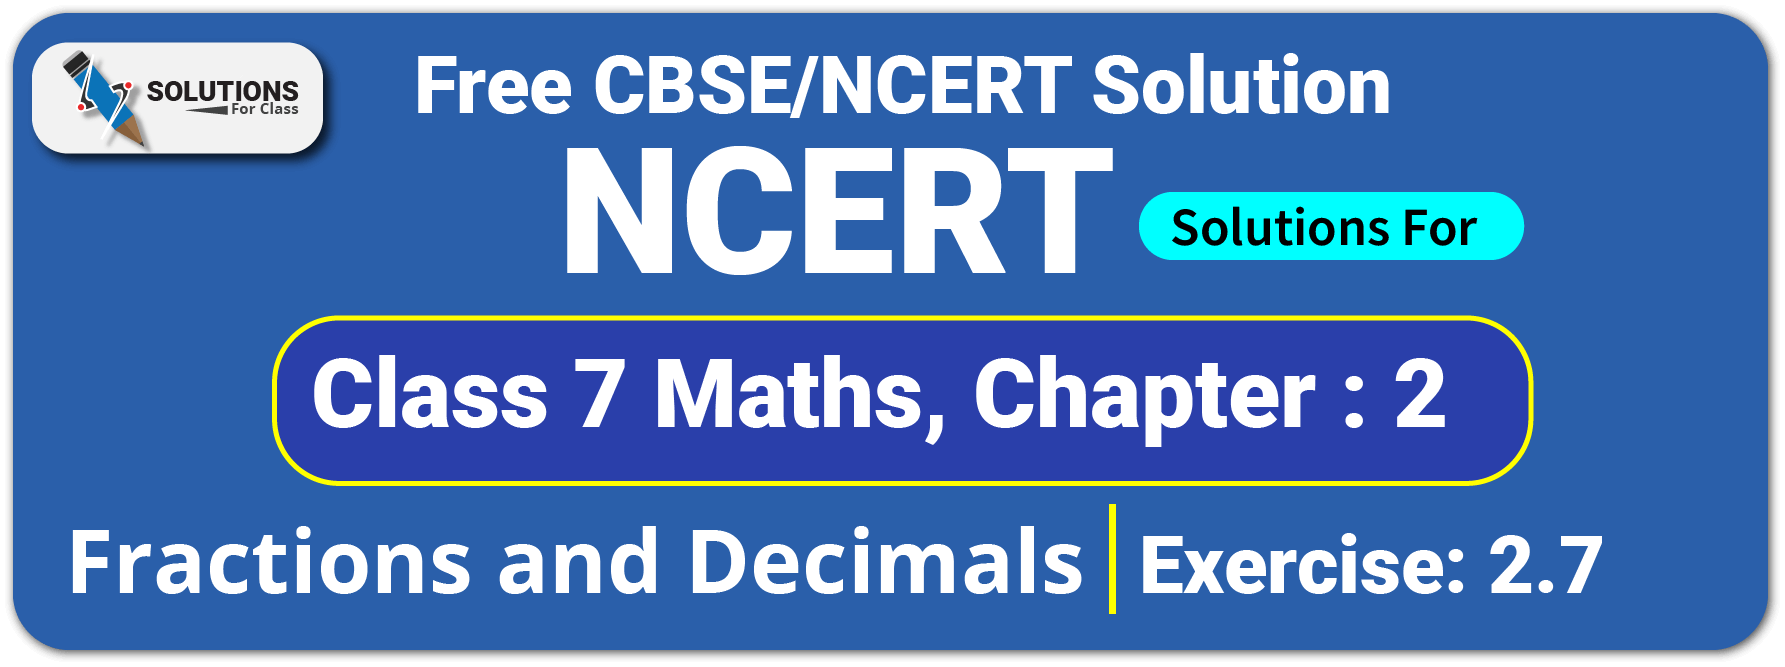 NCERT Solutions For Class 7 Chapter 2, Fractions and Decimals, Exercise 2.7